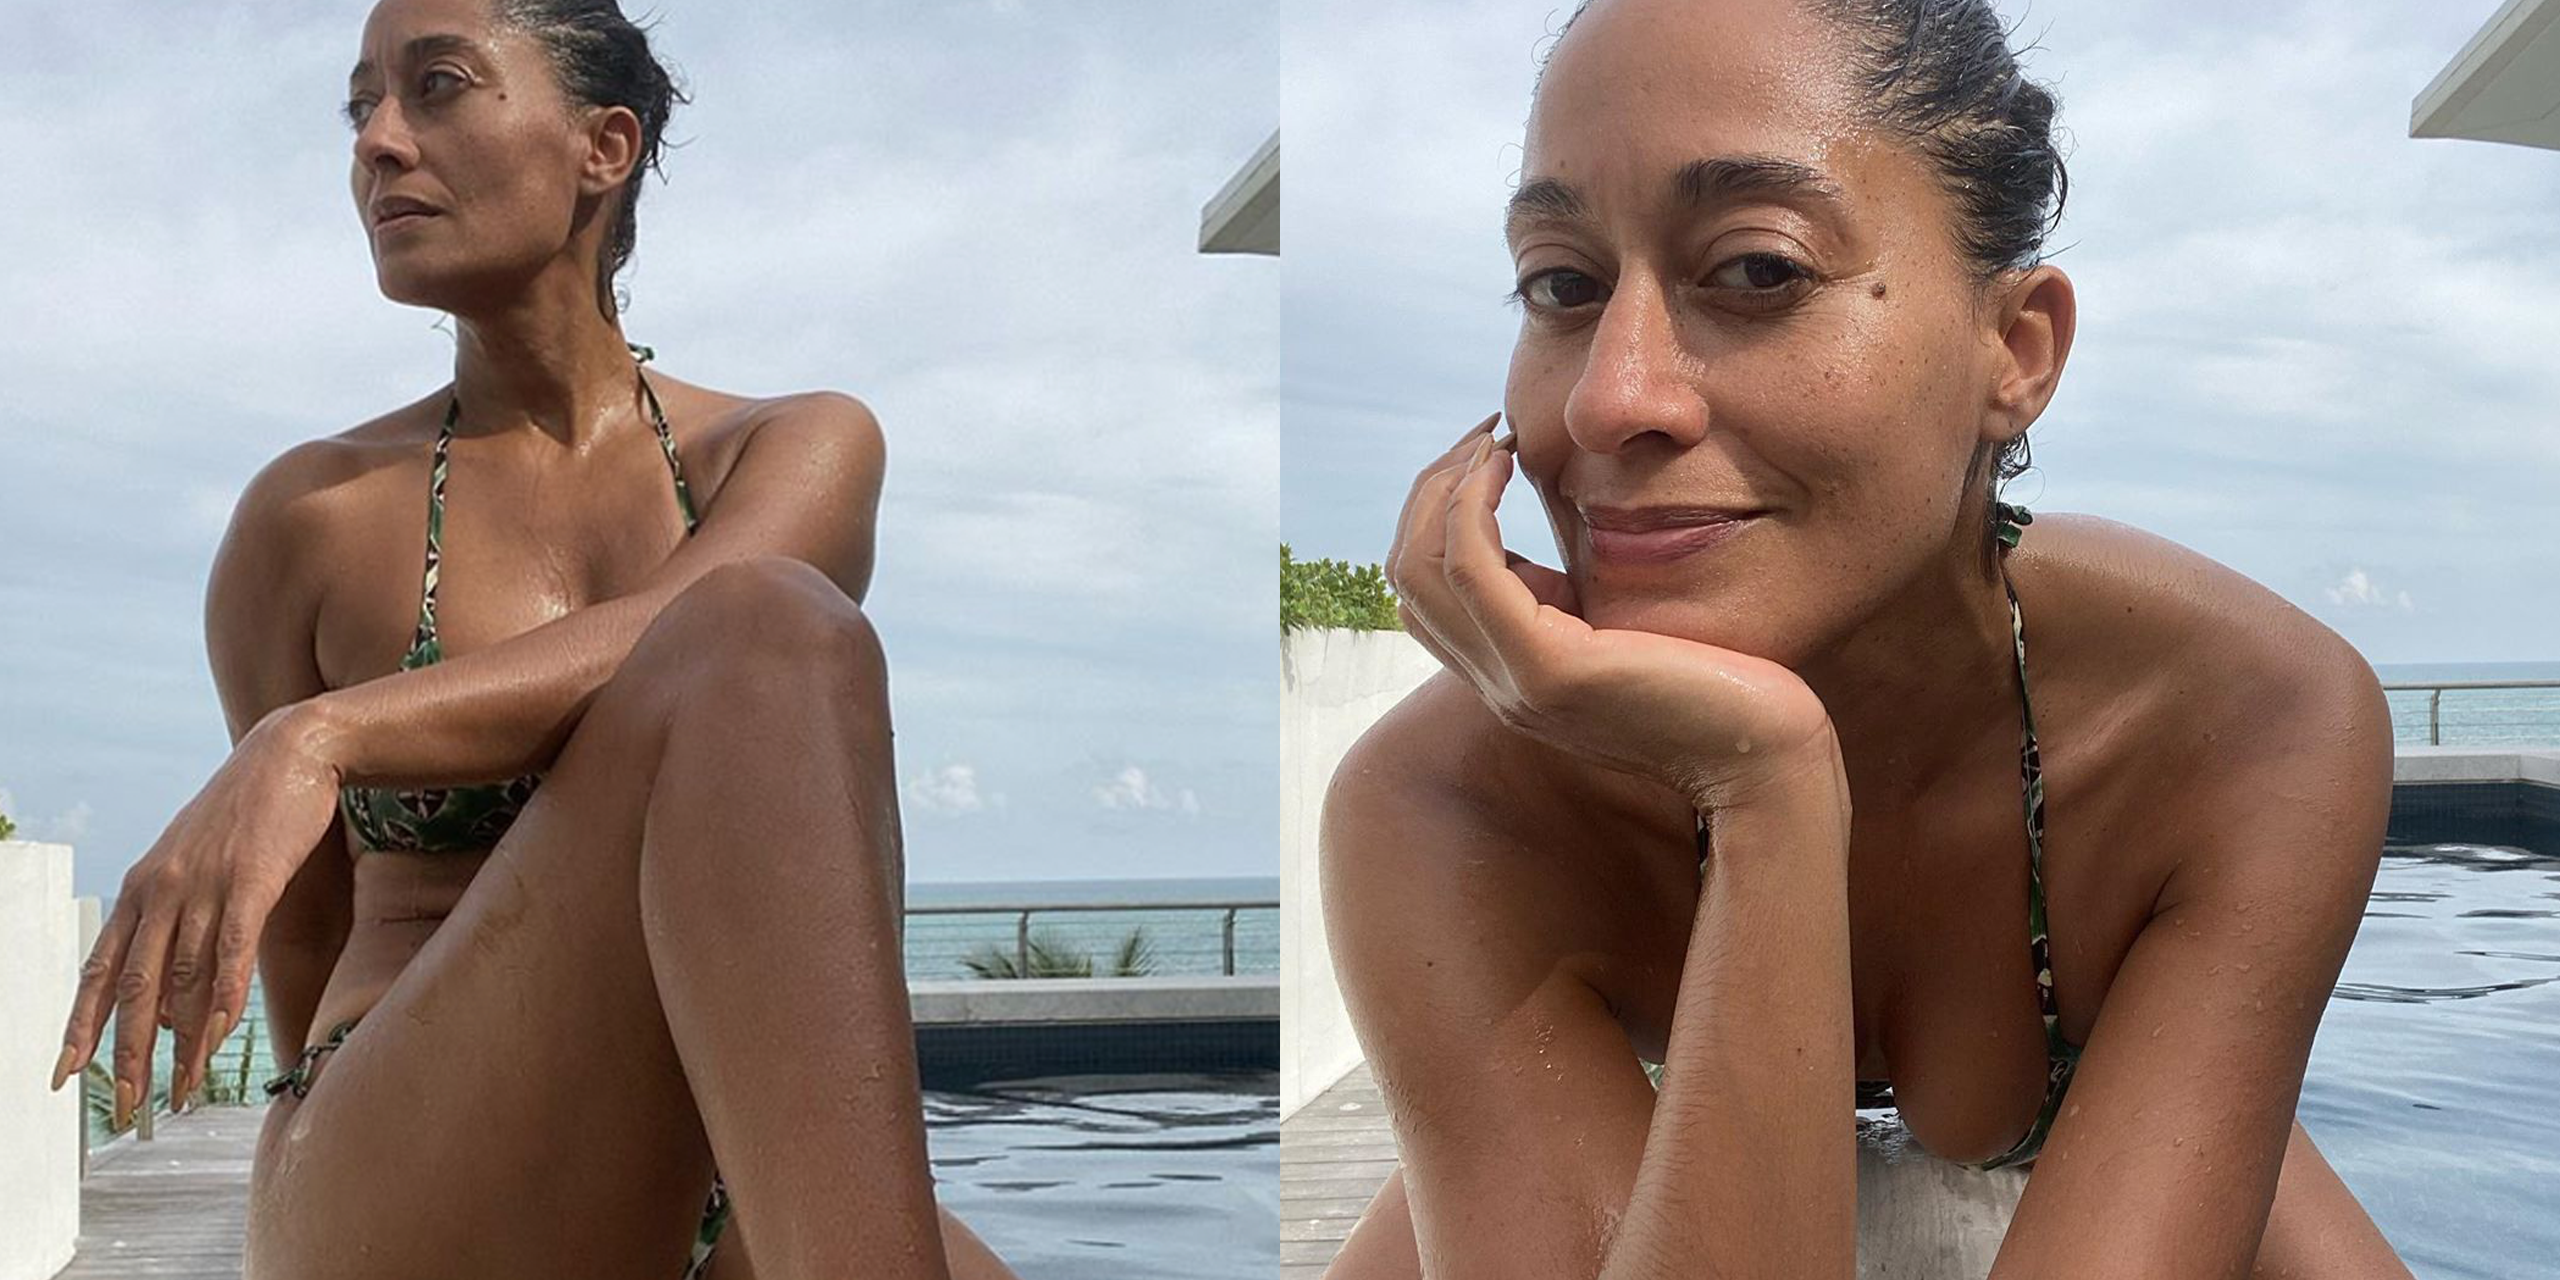 Tracee ellis ross sexy pic.